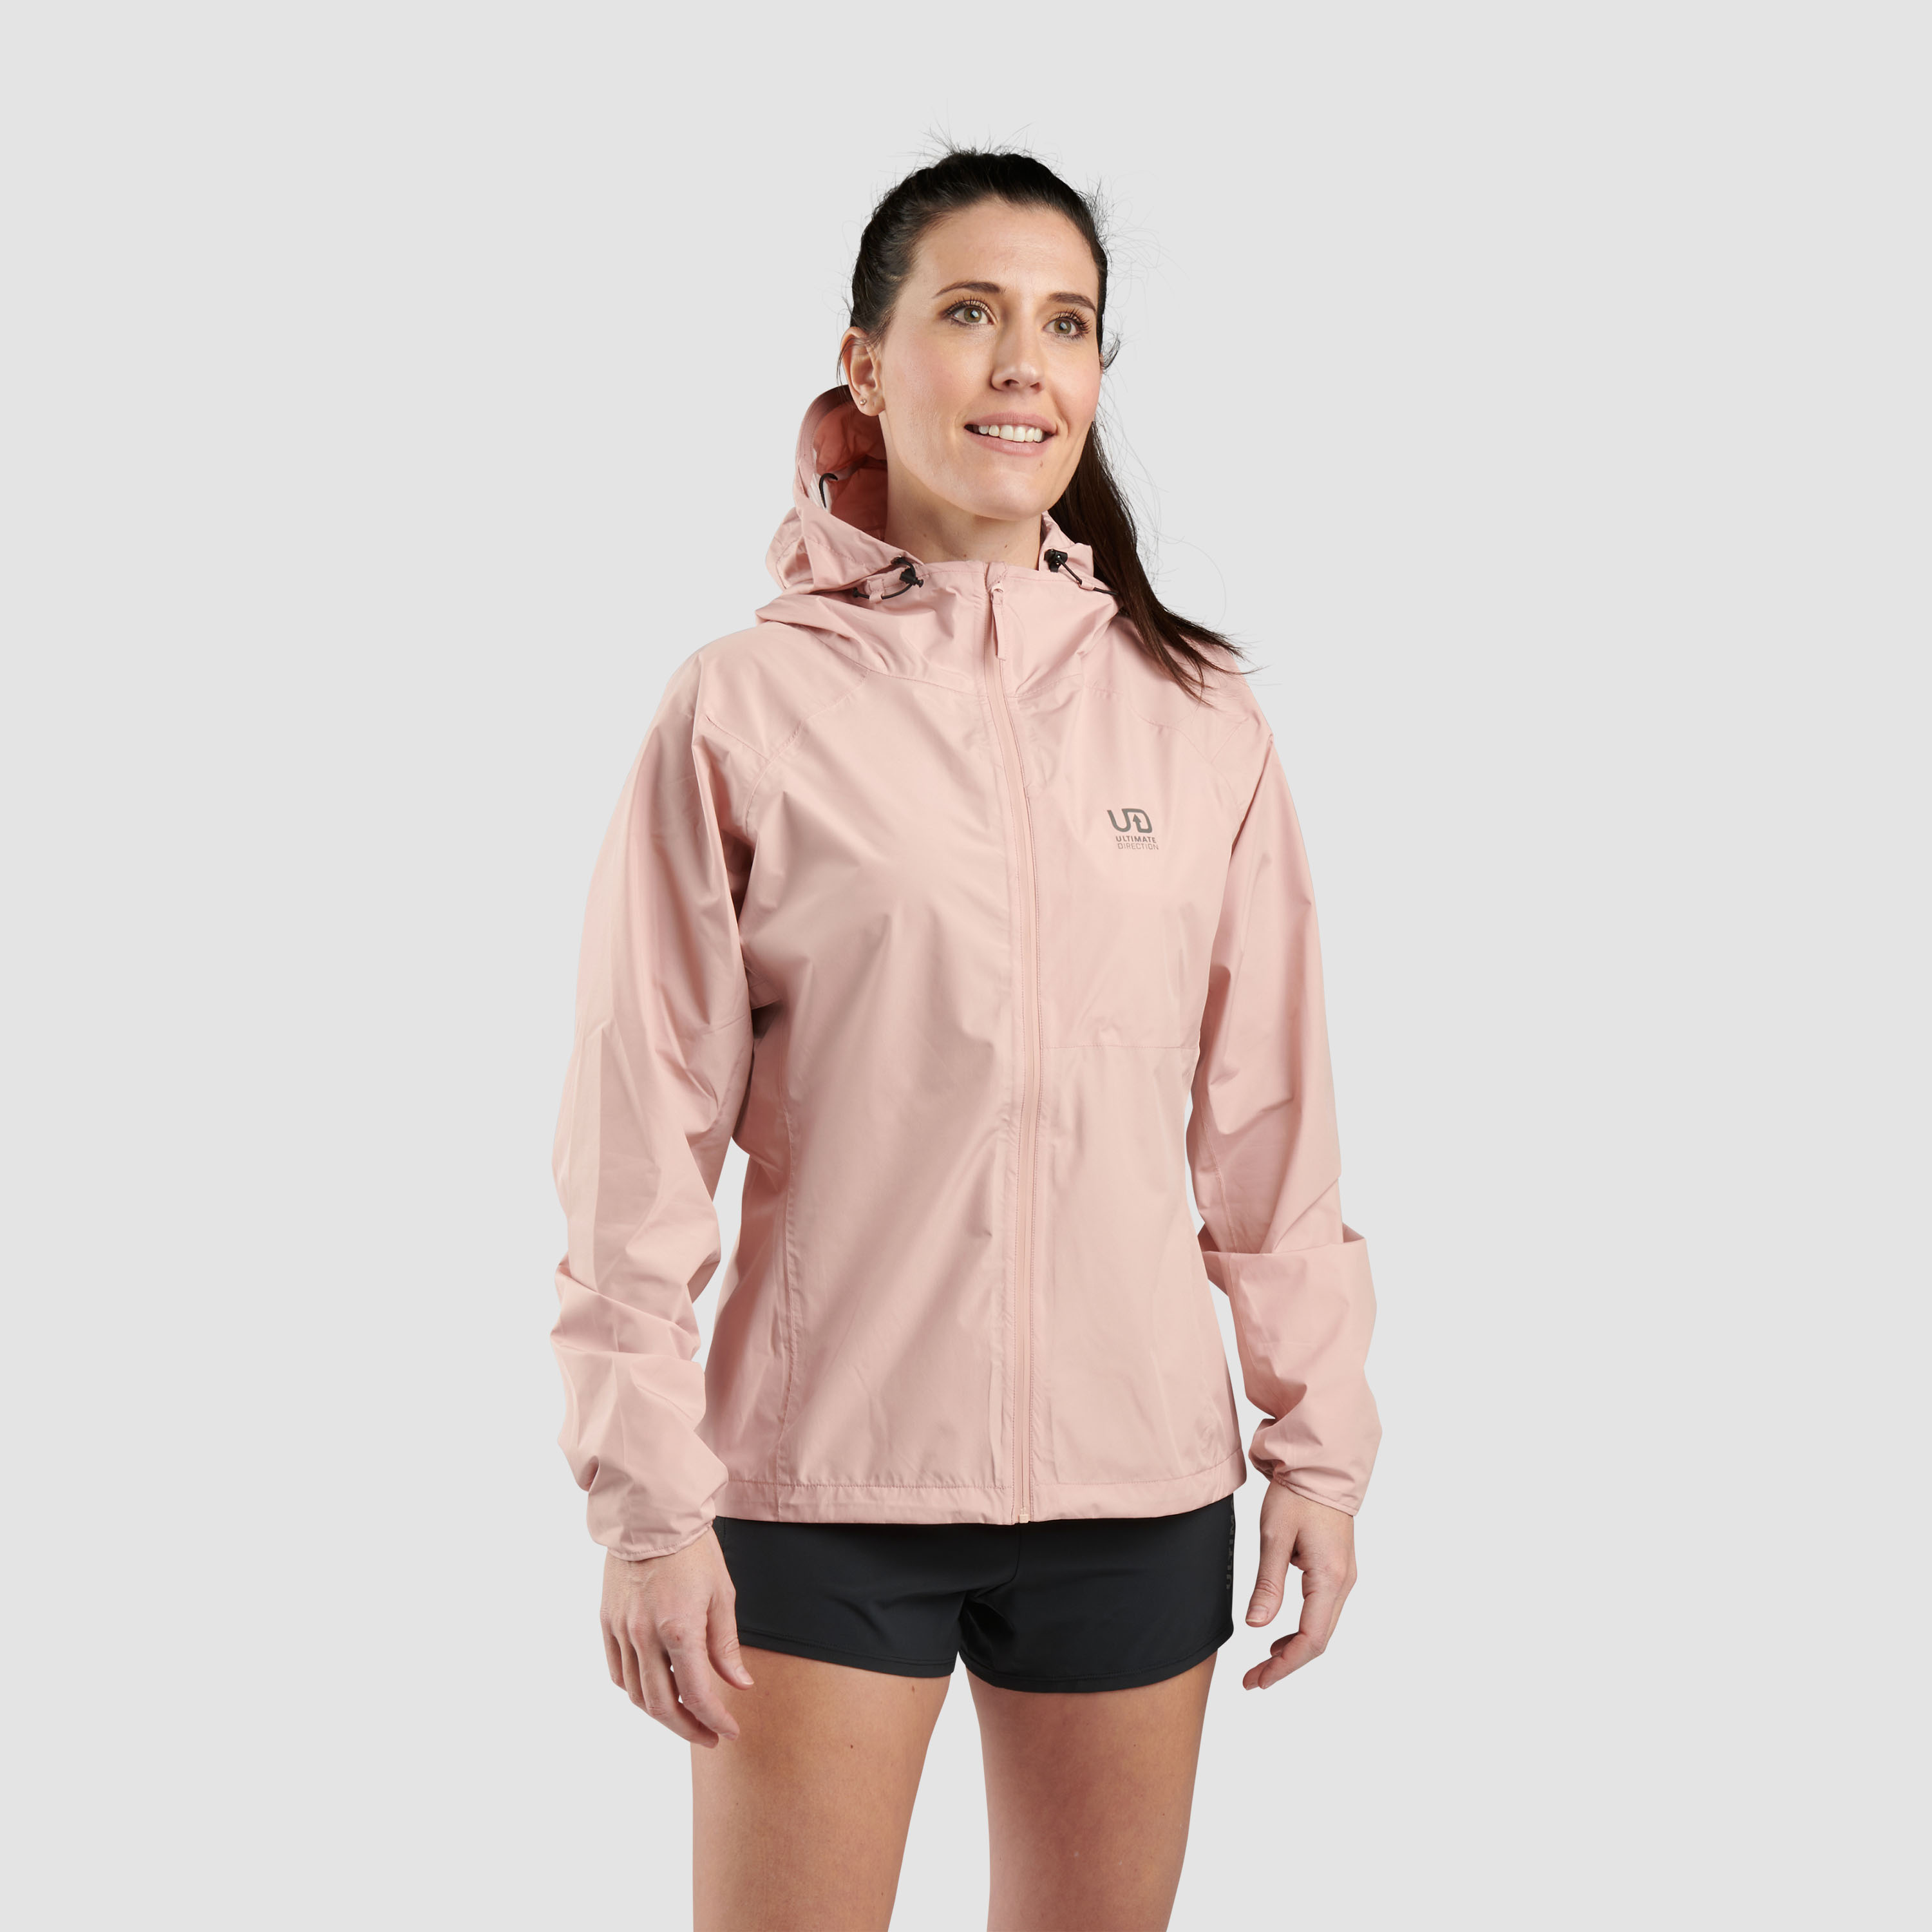 Image Ultimate Direction Deluge Jacket Women CLAY S